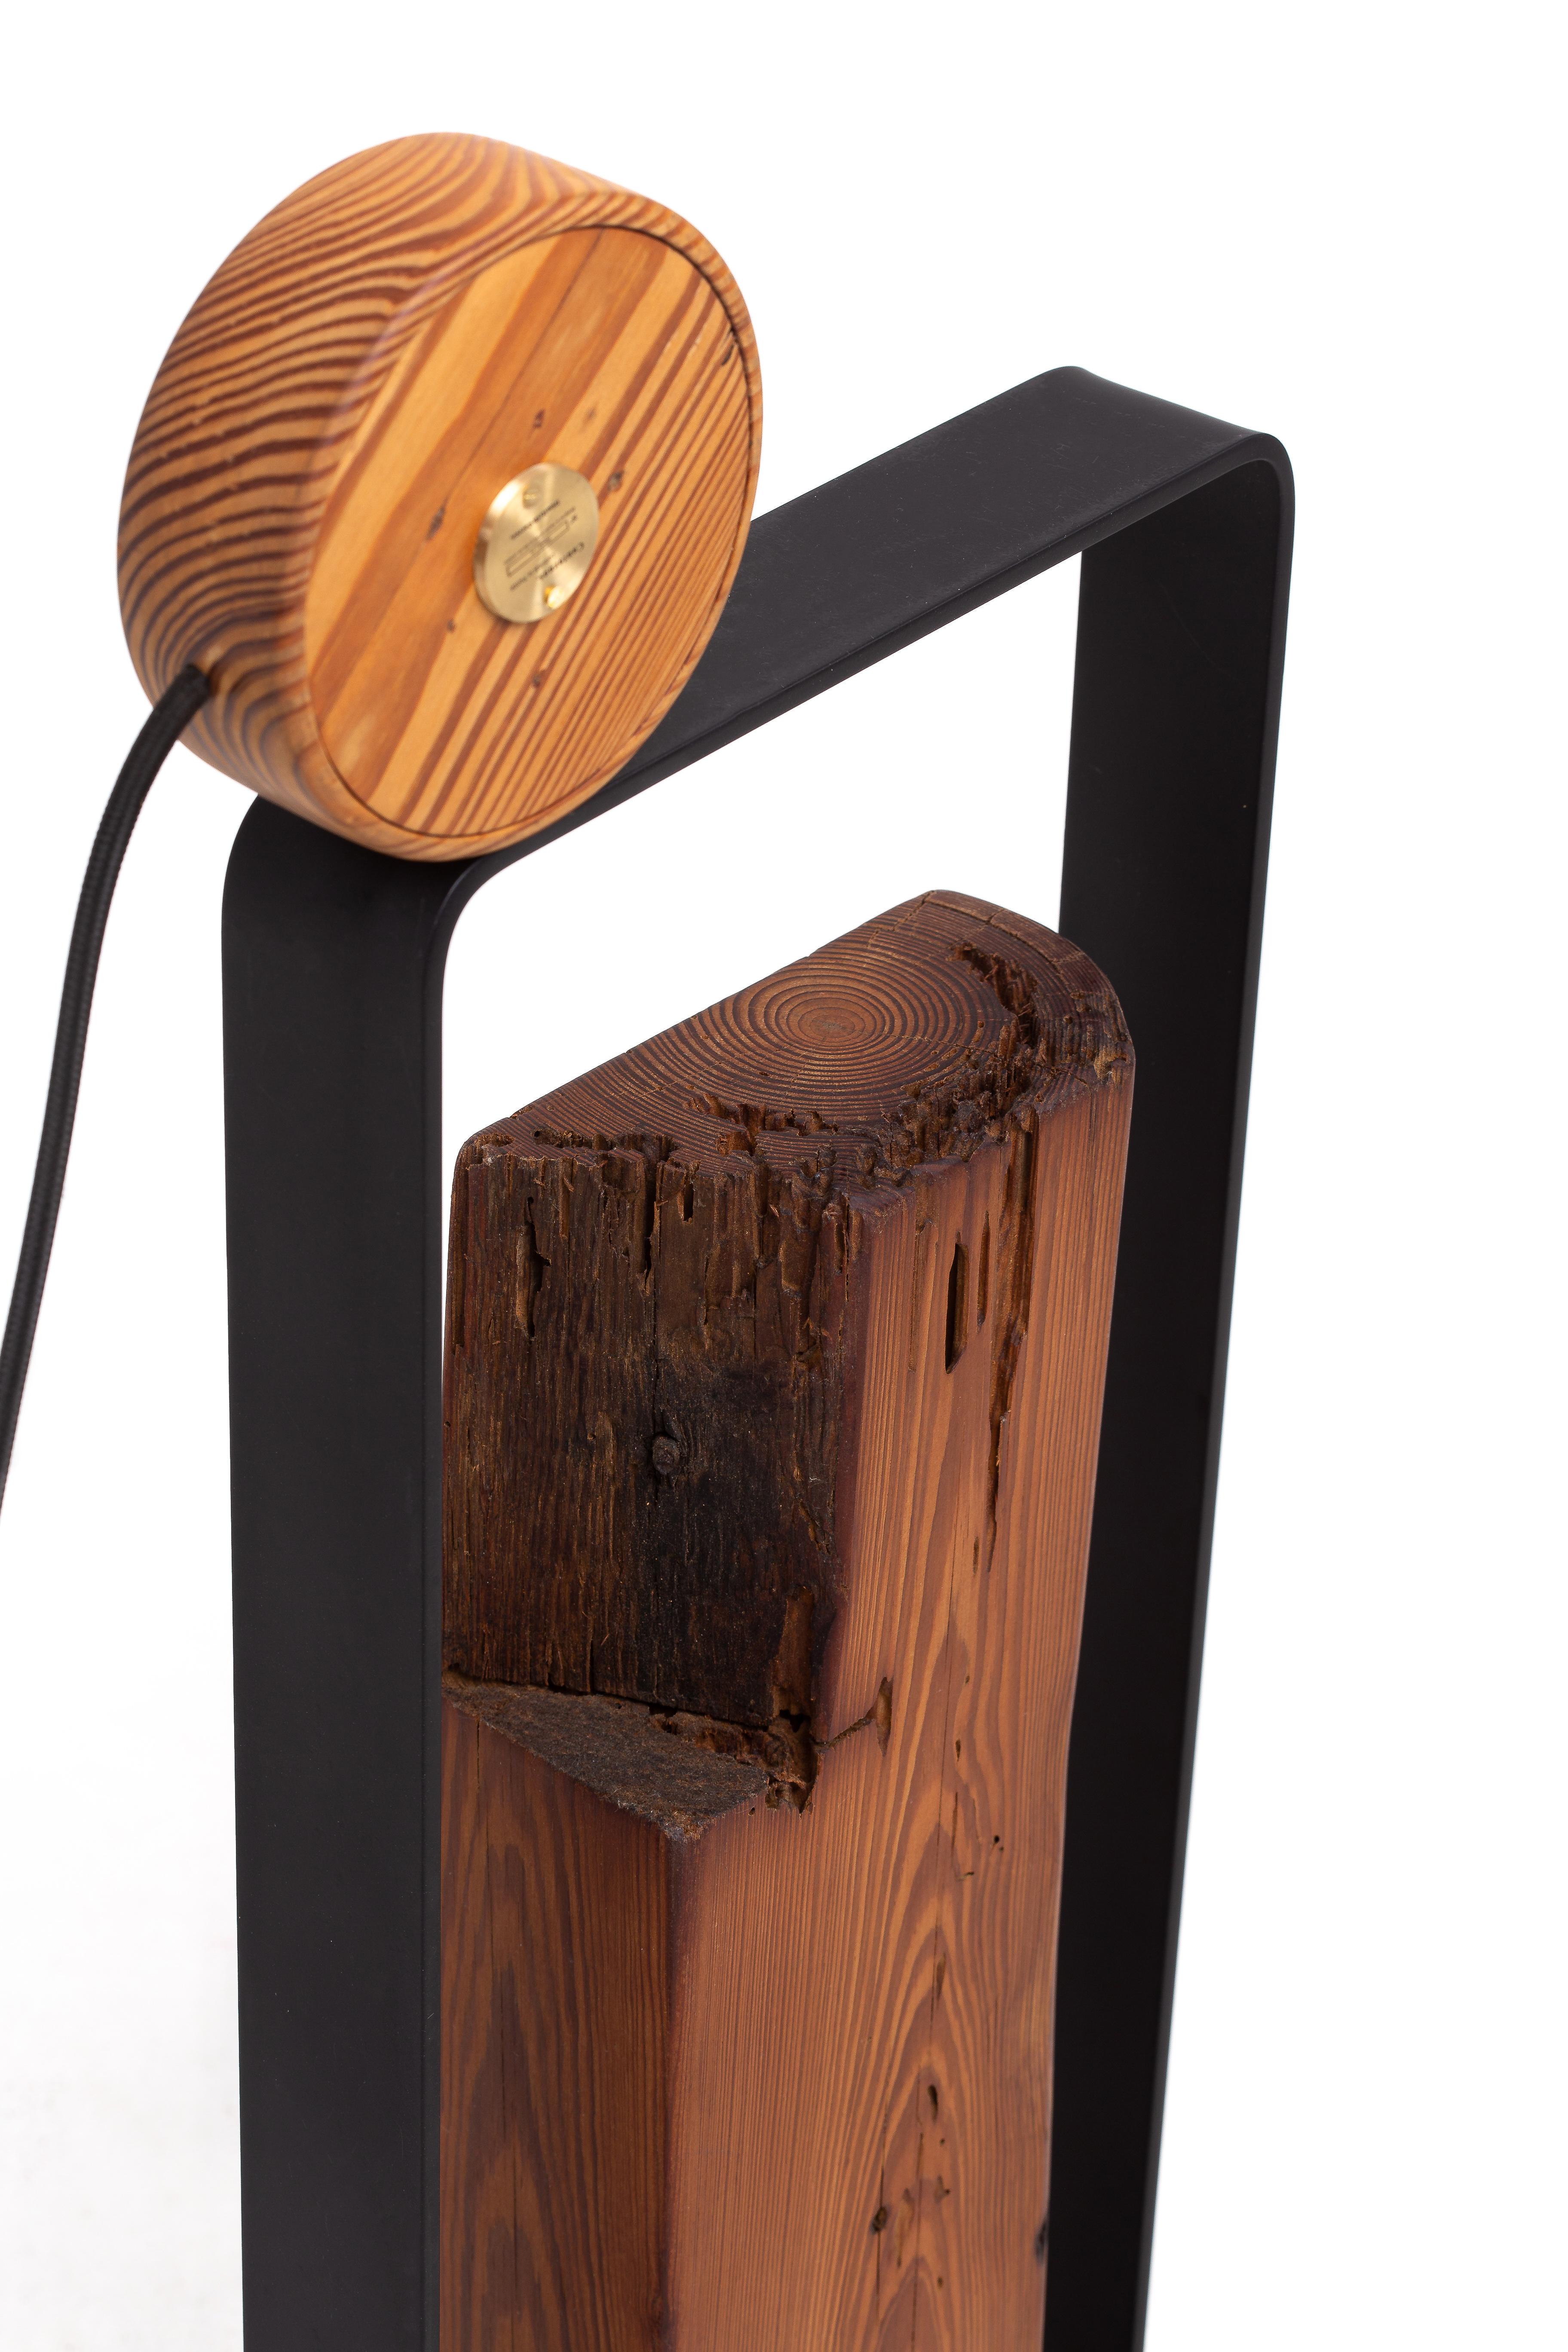 Hand-Crafted Minimalist Brazilian Handcrafted Lamp ''Contornos'' by Dimitrih Correa For Sale